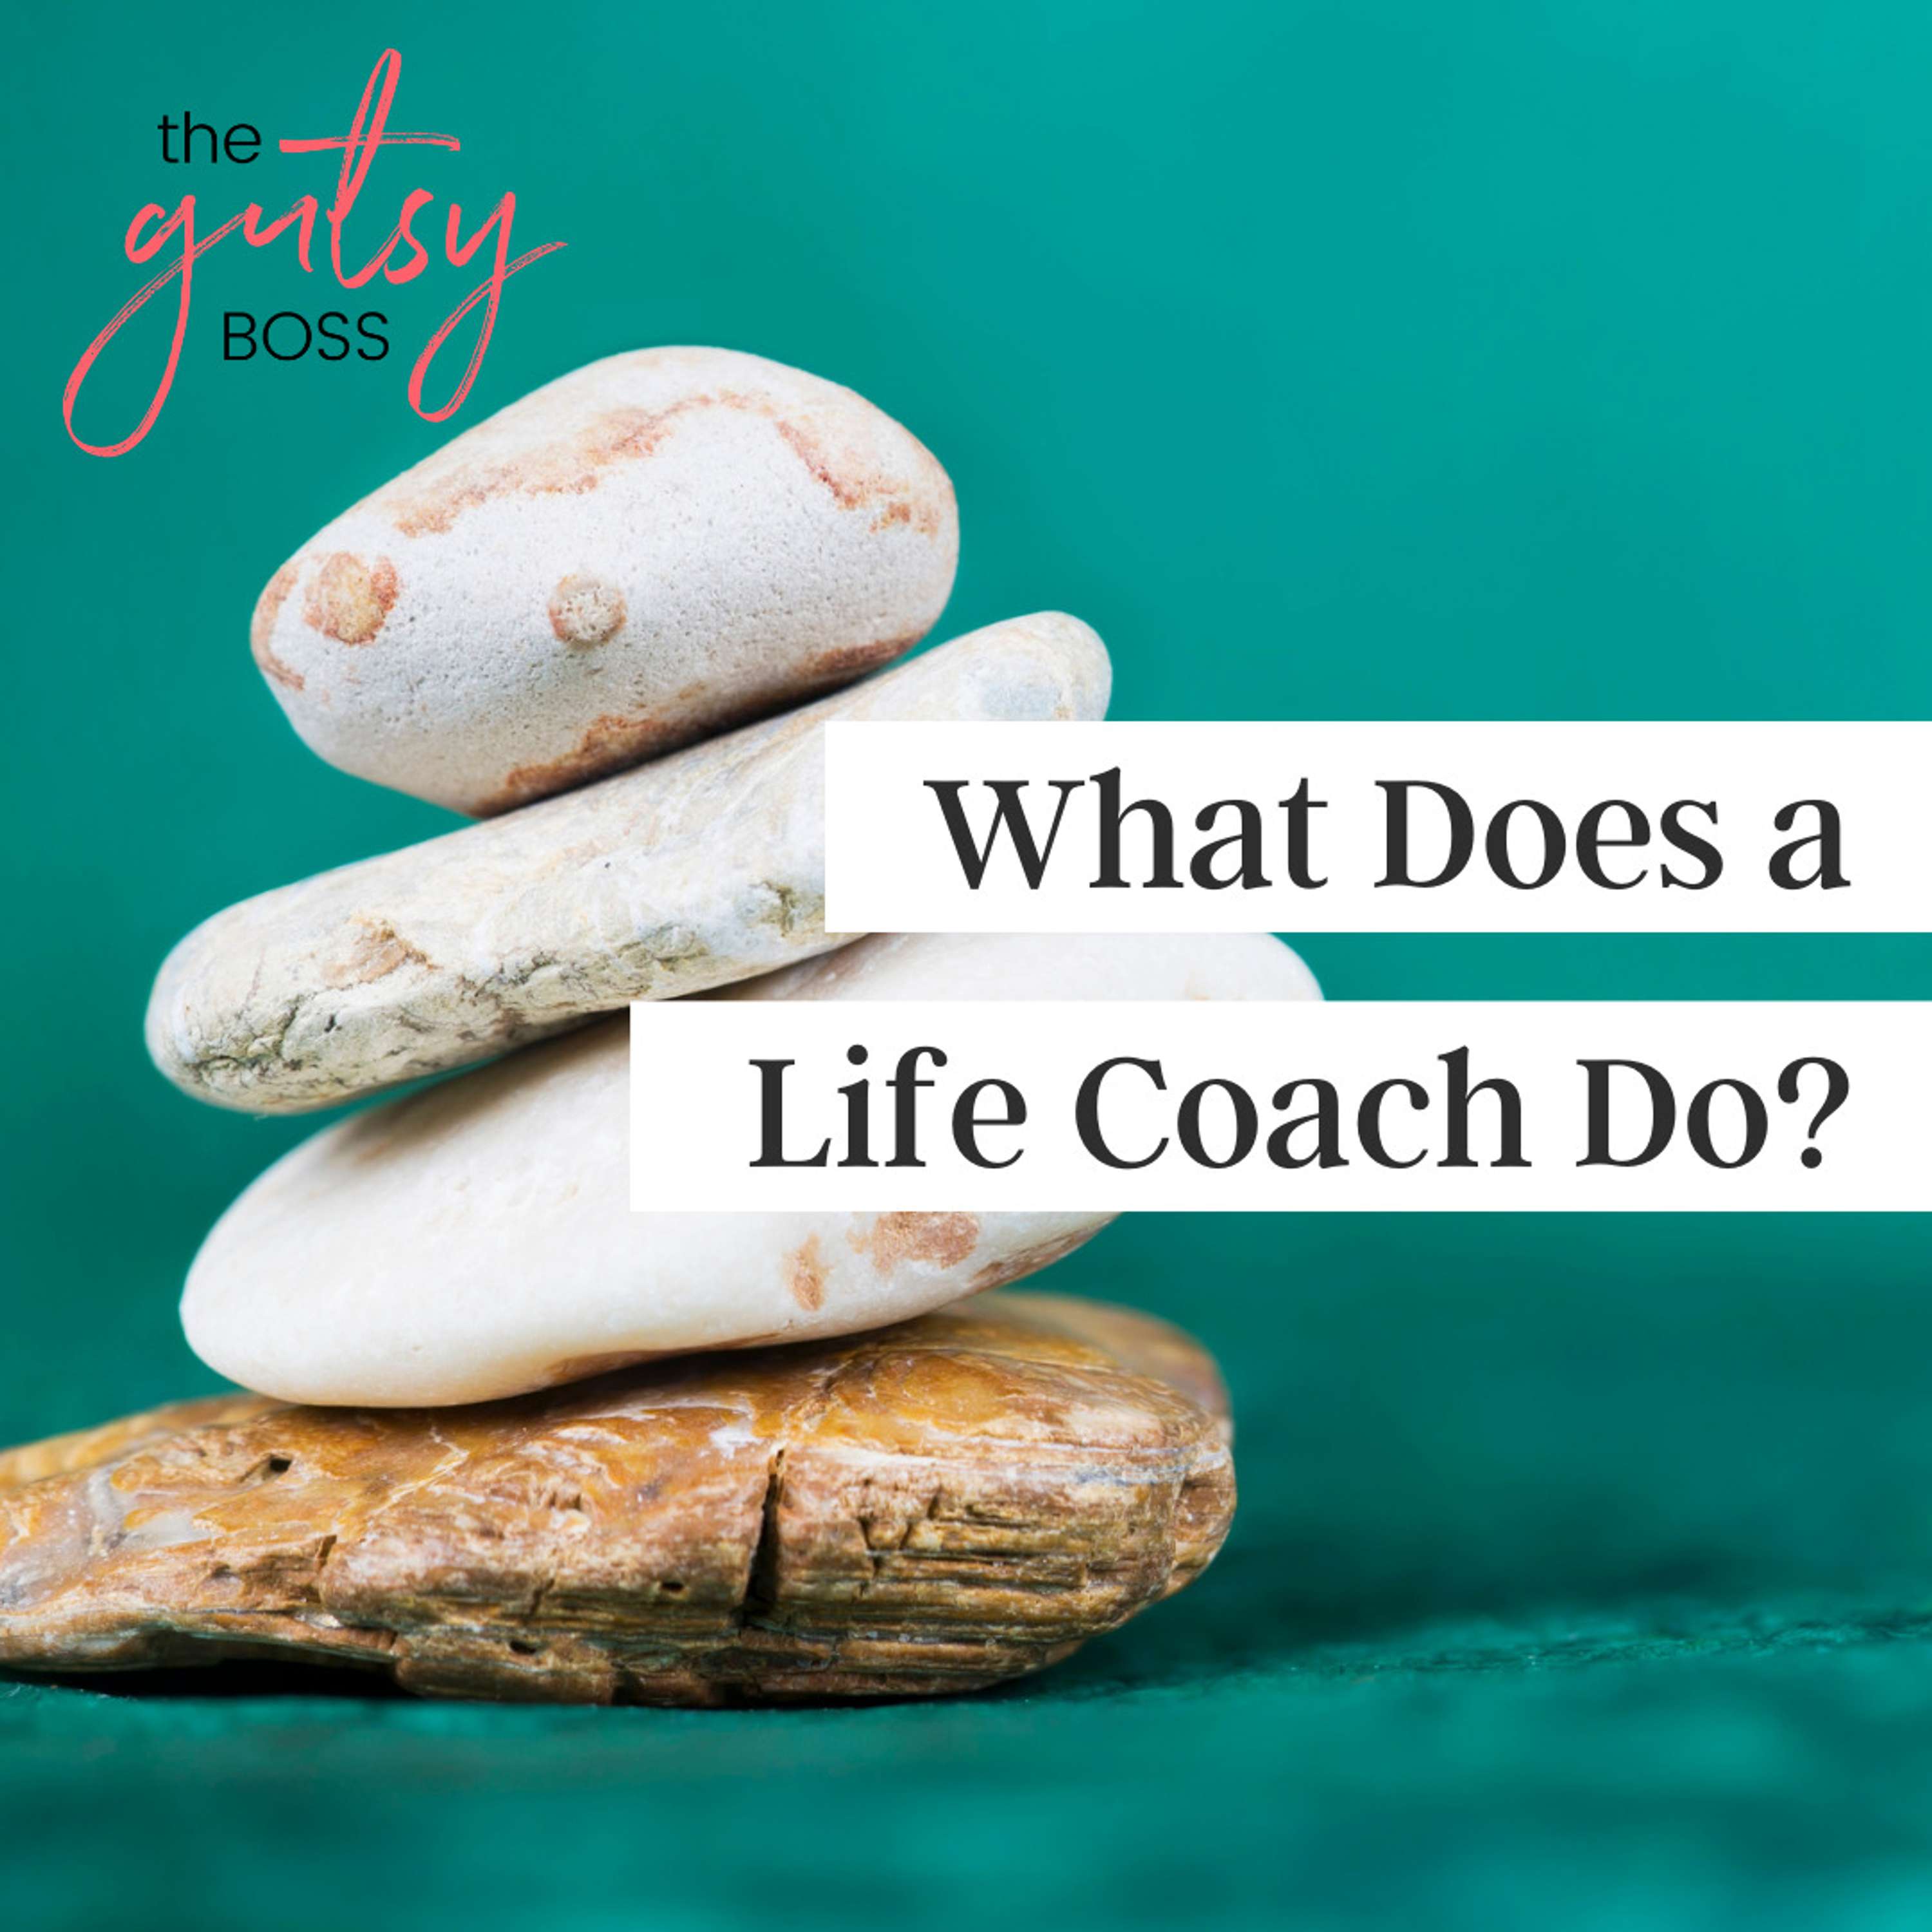 26. What Does a Life Coach Do?